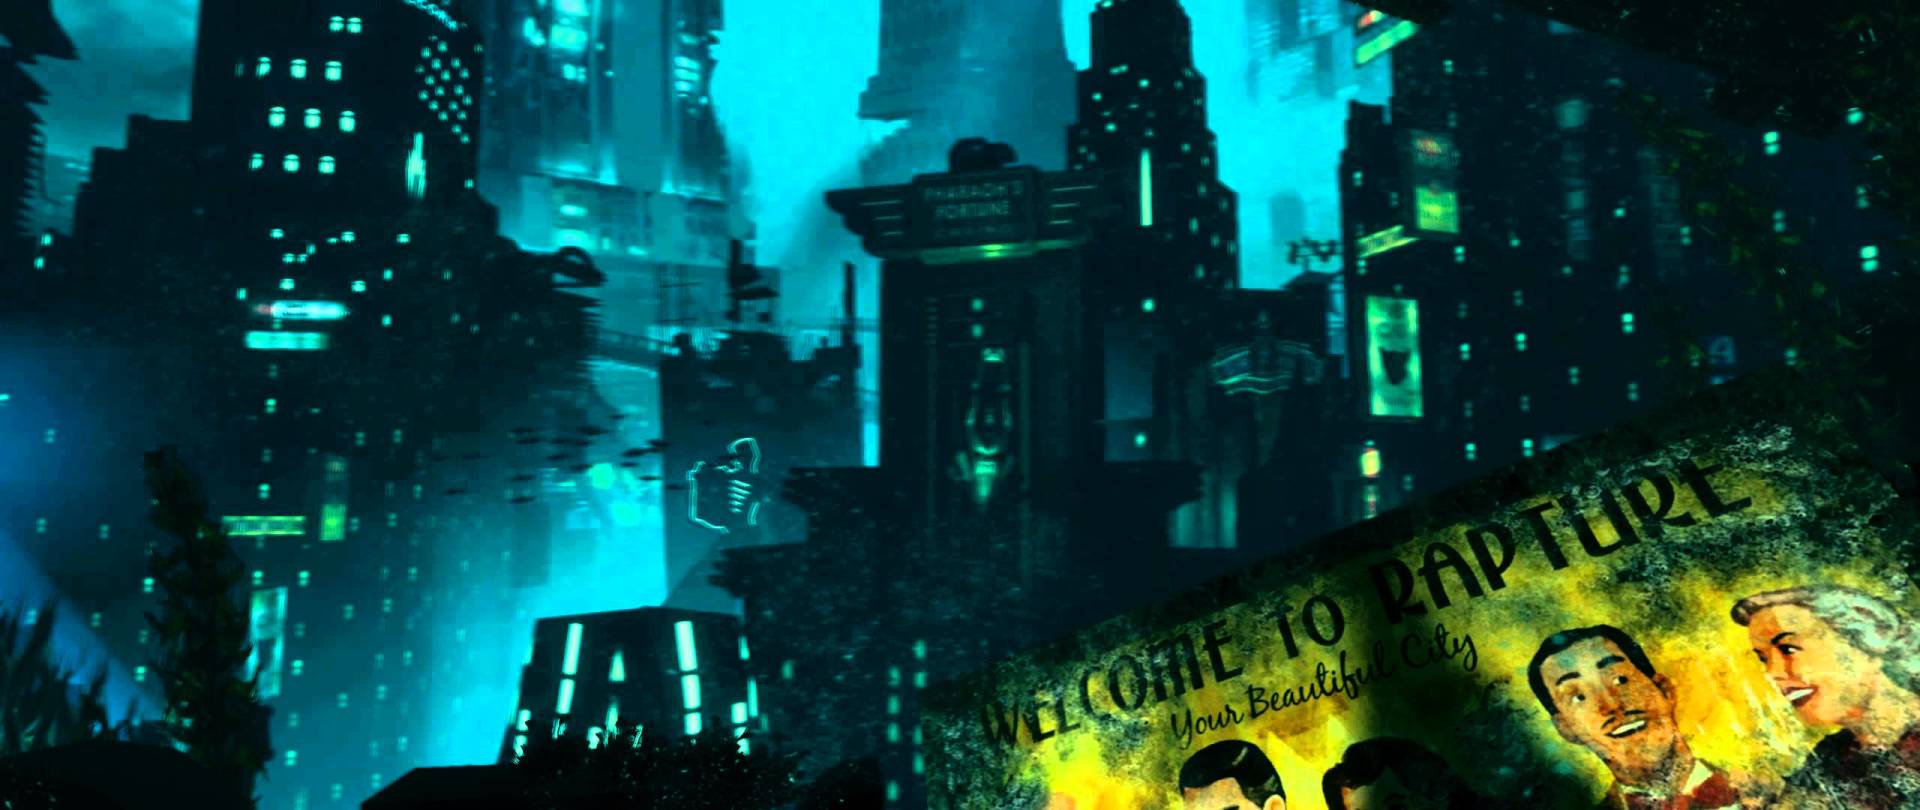 best image about Rapture City Bioshock iPhone. HD